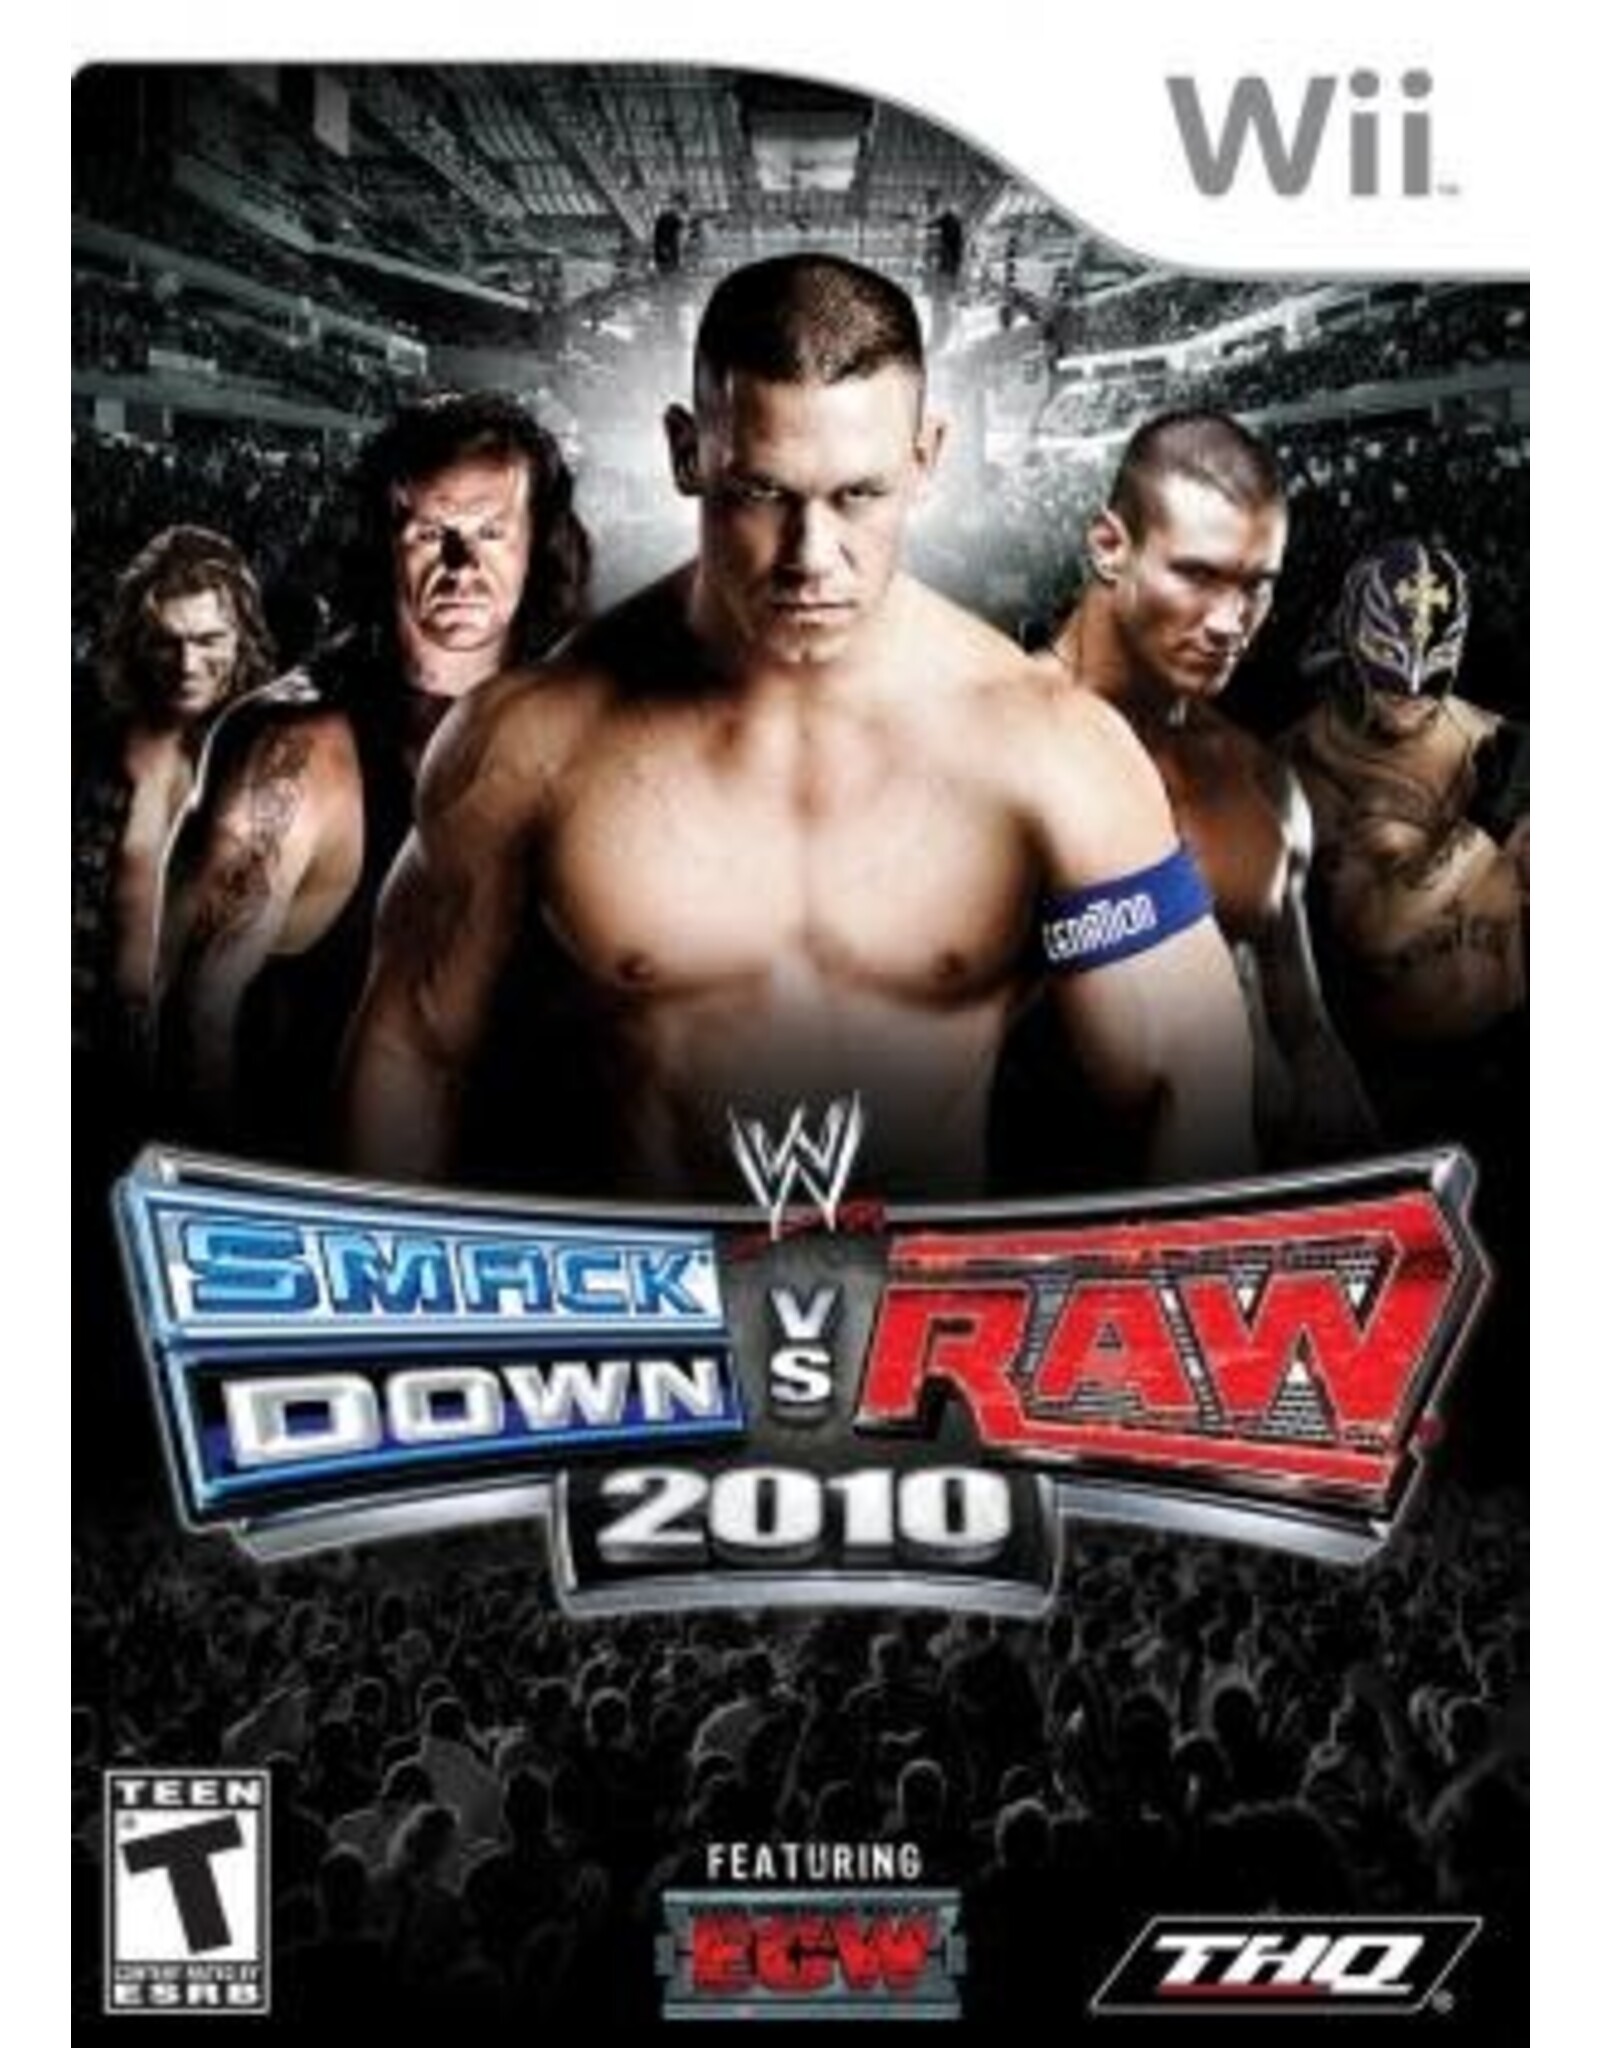 Wii WWE Smackdown vs. Raw 2010 (Used)